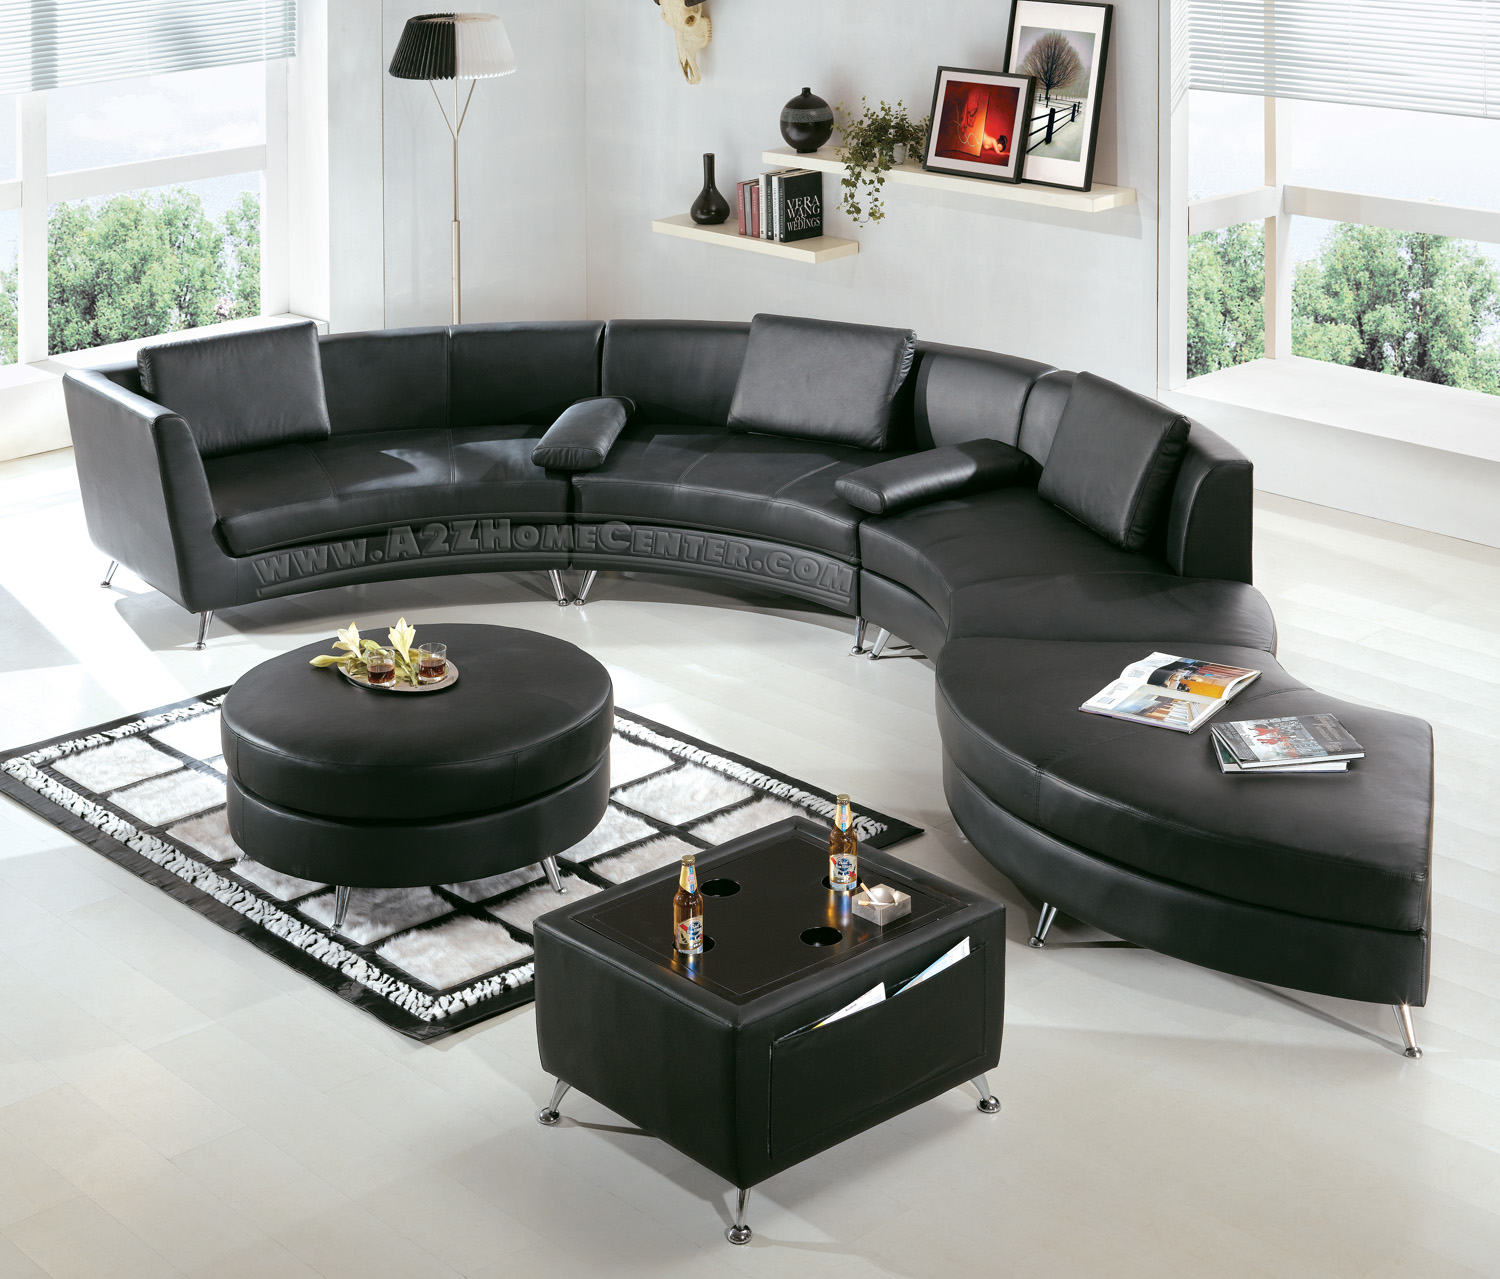 modern leather furniture on Modern Leather Sectional Furniture  April 13  2009